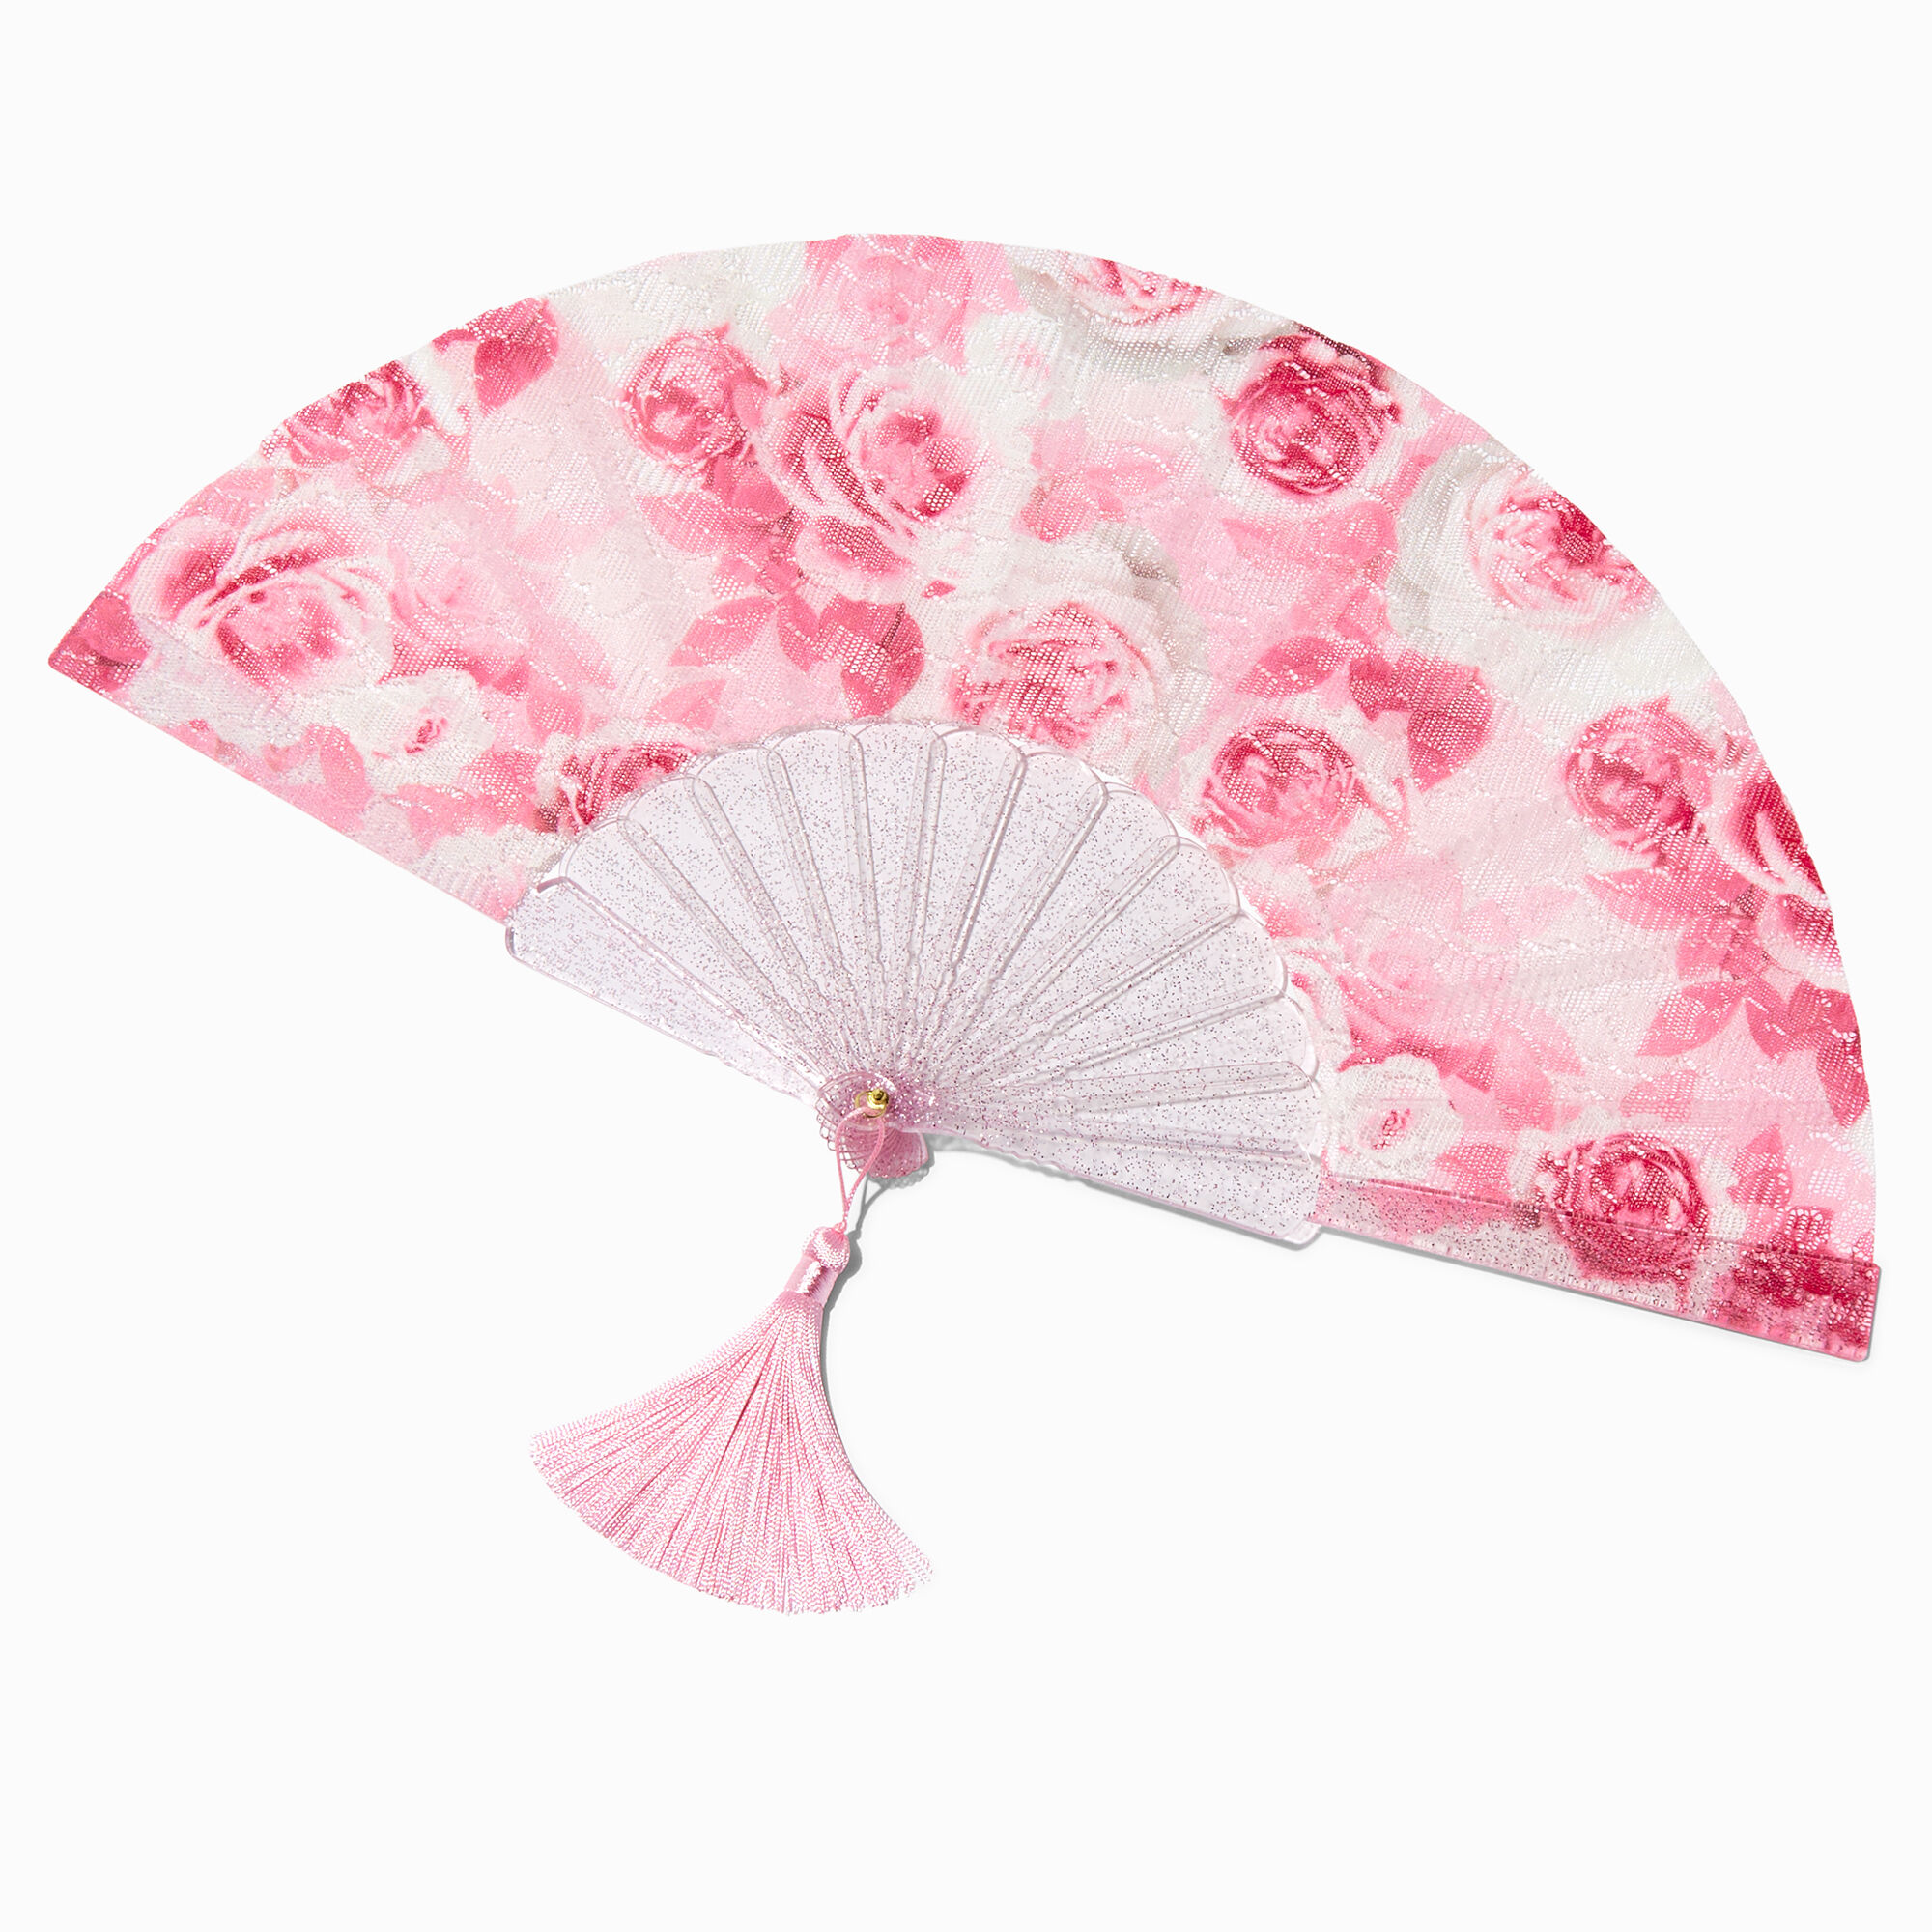 View Claires Rose Print Personal Folding Fan Pink information